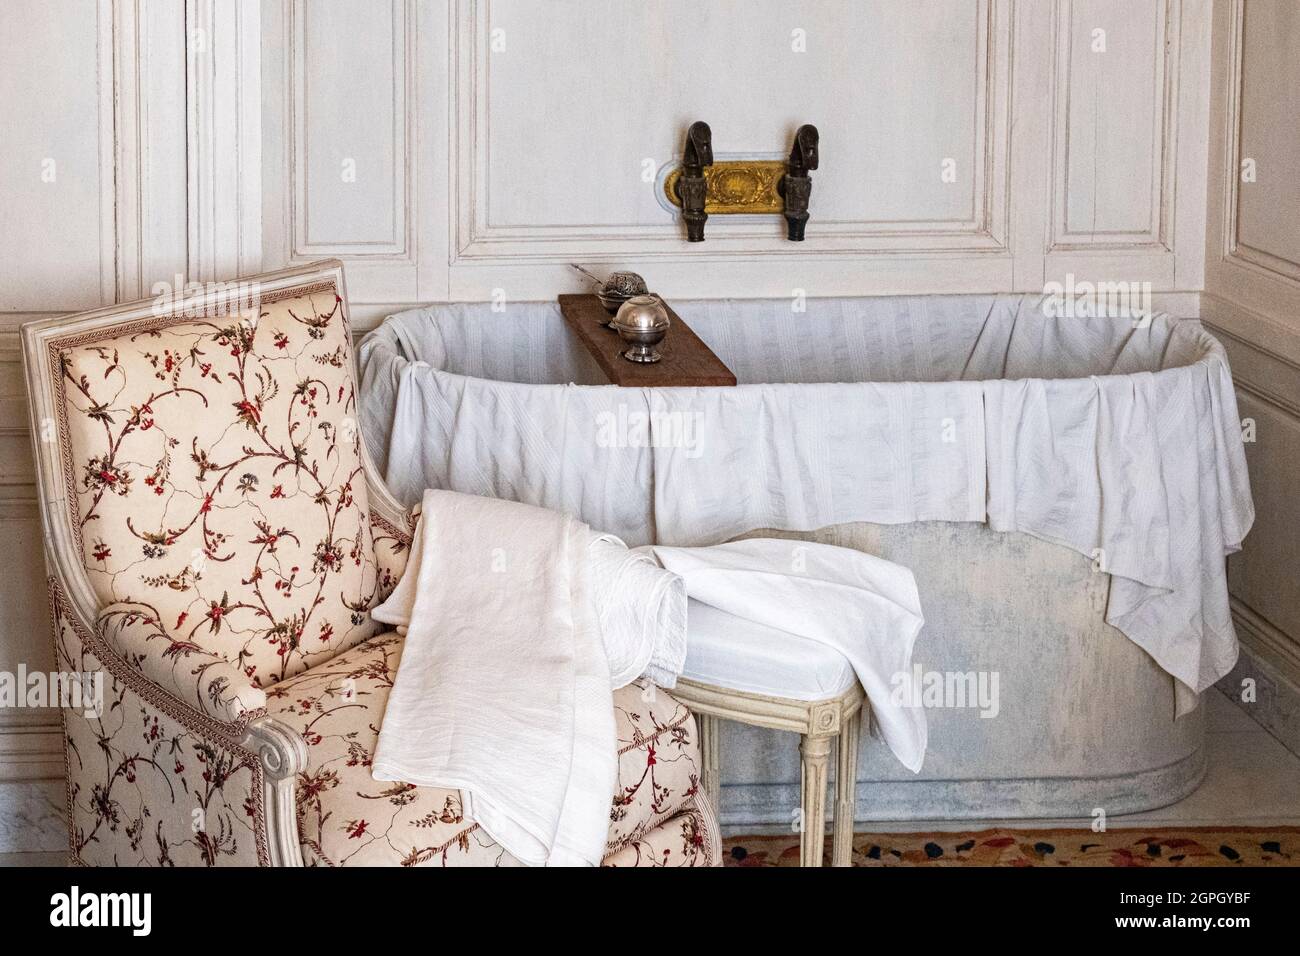 France, Paris, the Hotel de la Marine created in the 18th century by Ange-Jacques Gabriel, formerly custodian of the King's furniture until 1798, then headquarters of the Ministry of the Navy, room 6, bathroom Stock Photo